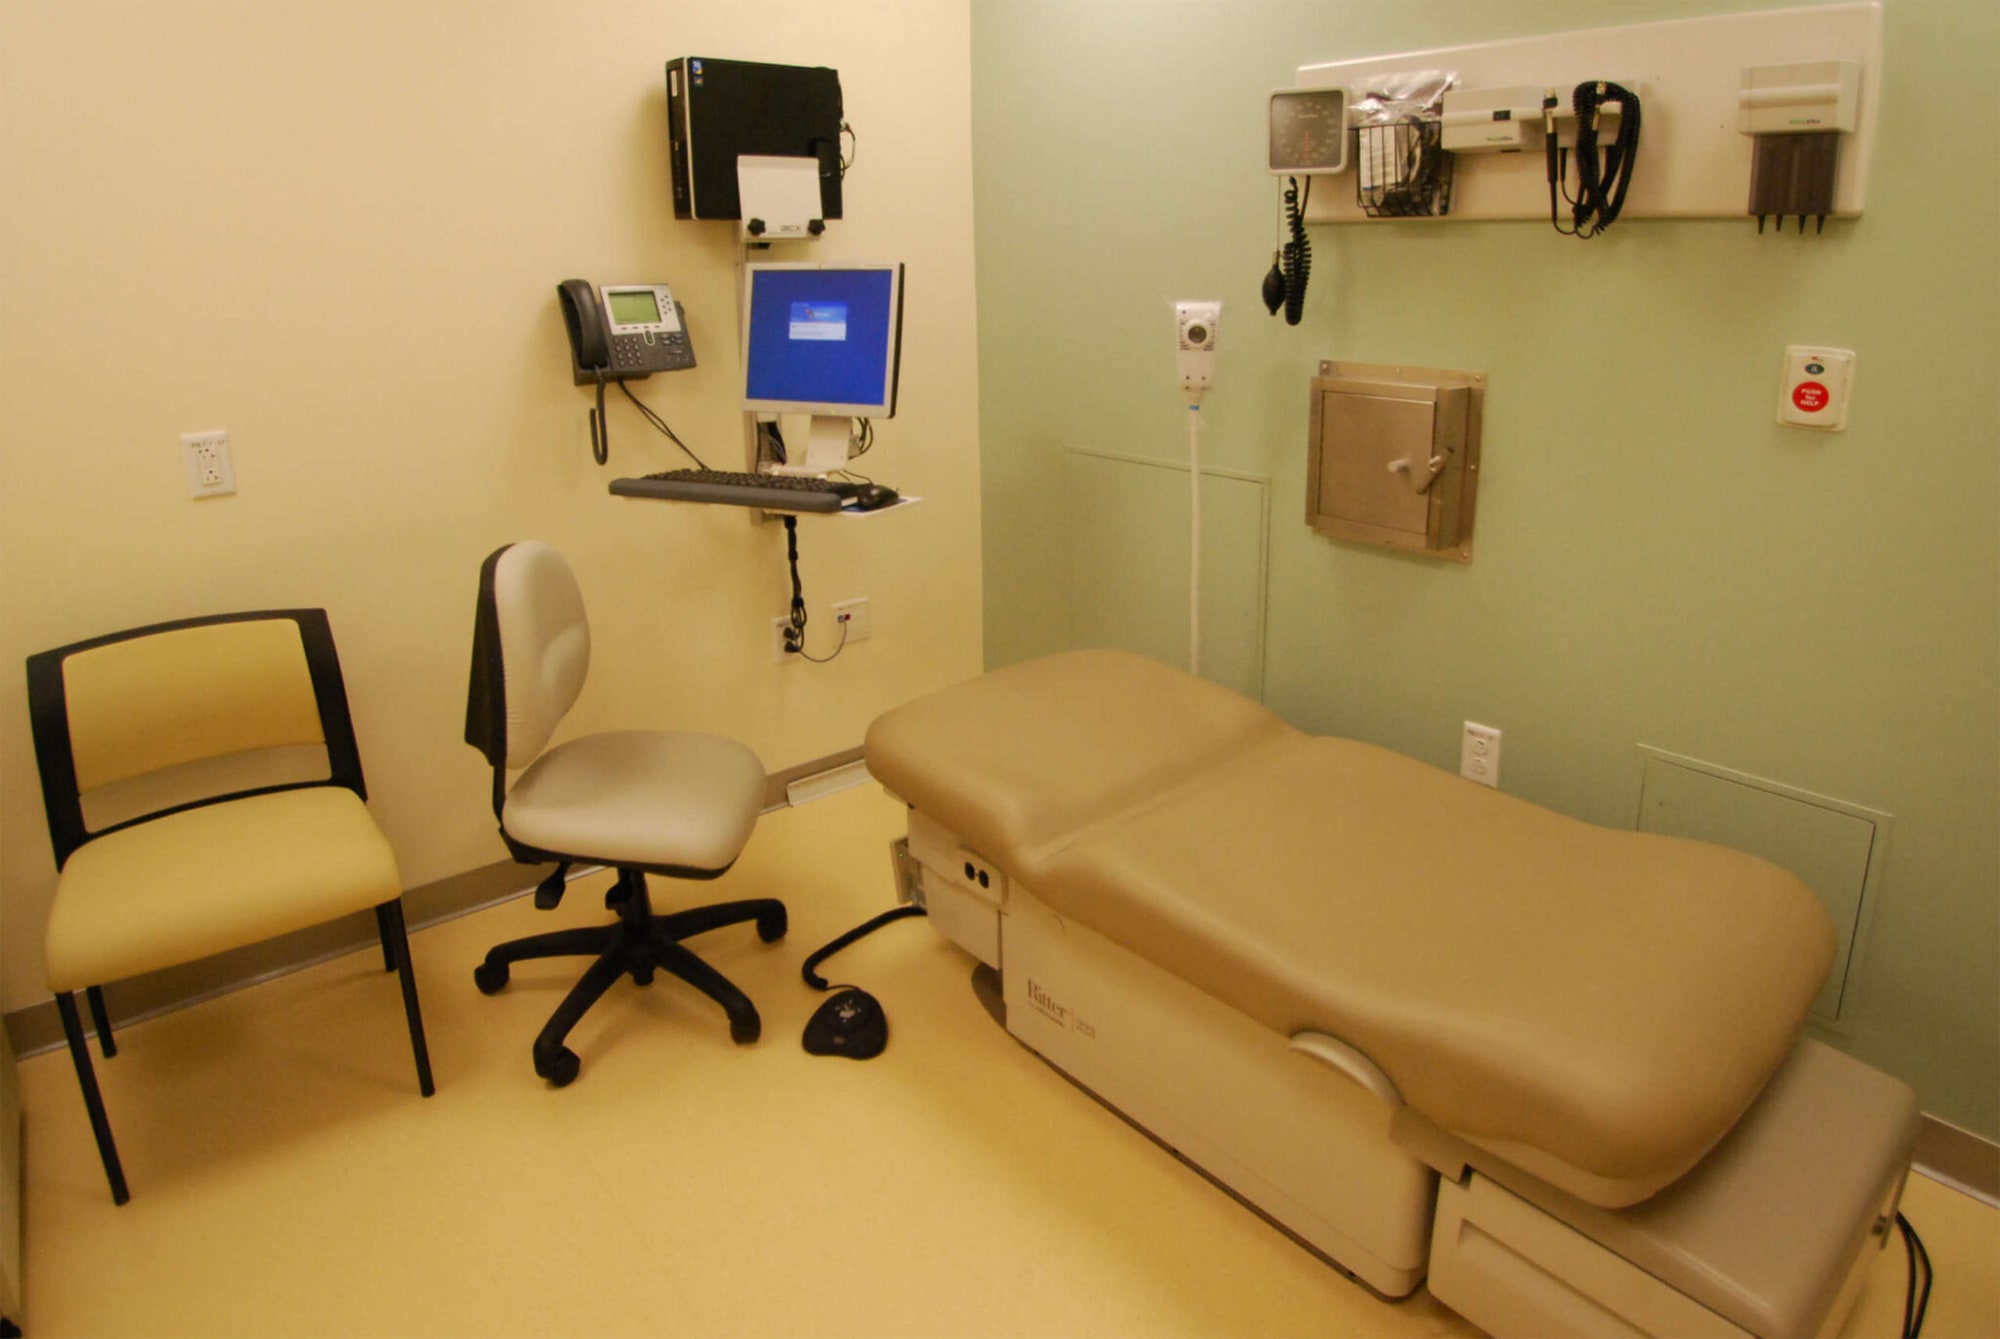 Exam room at the Hillcrest Mental Health Facility